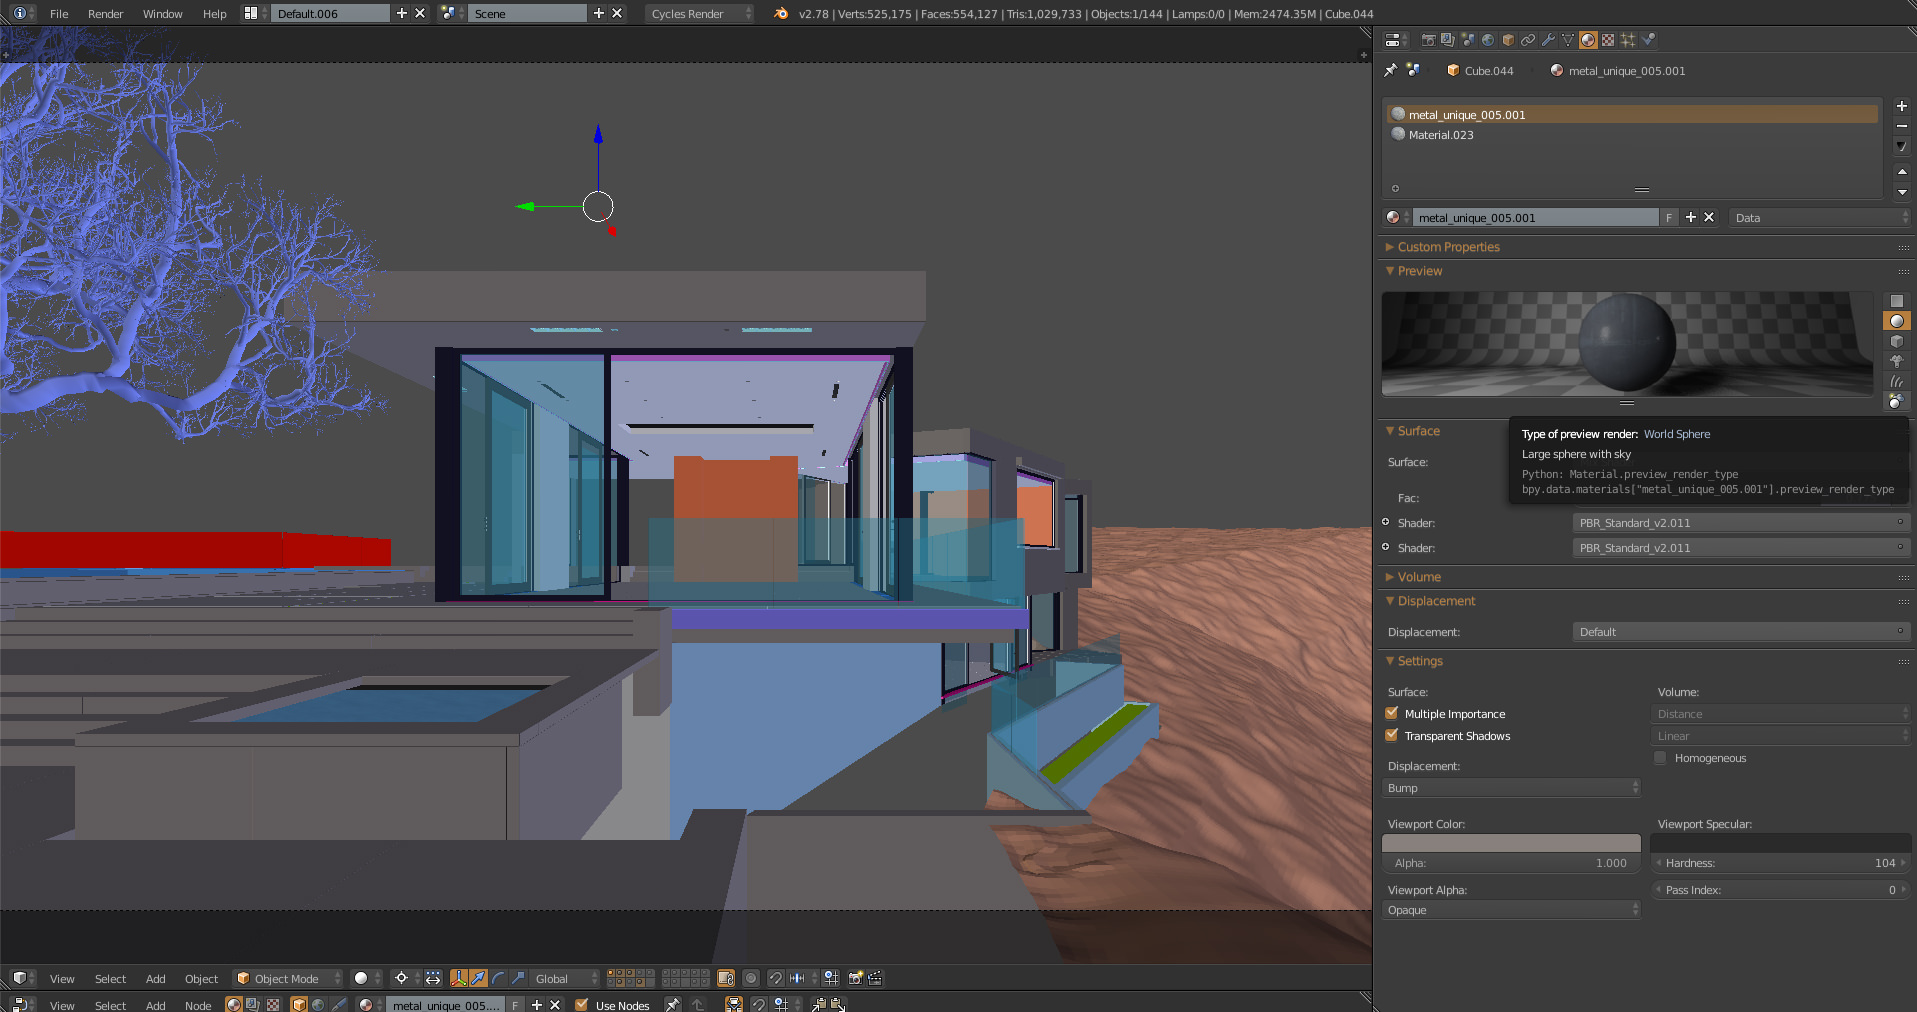 View in solid mode with specific viewport color for each material